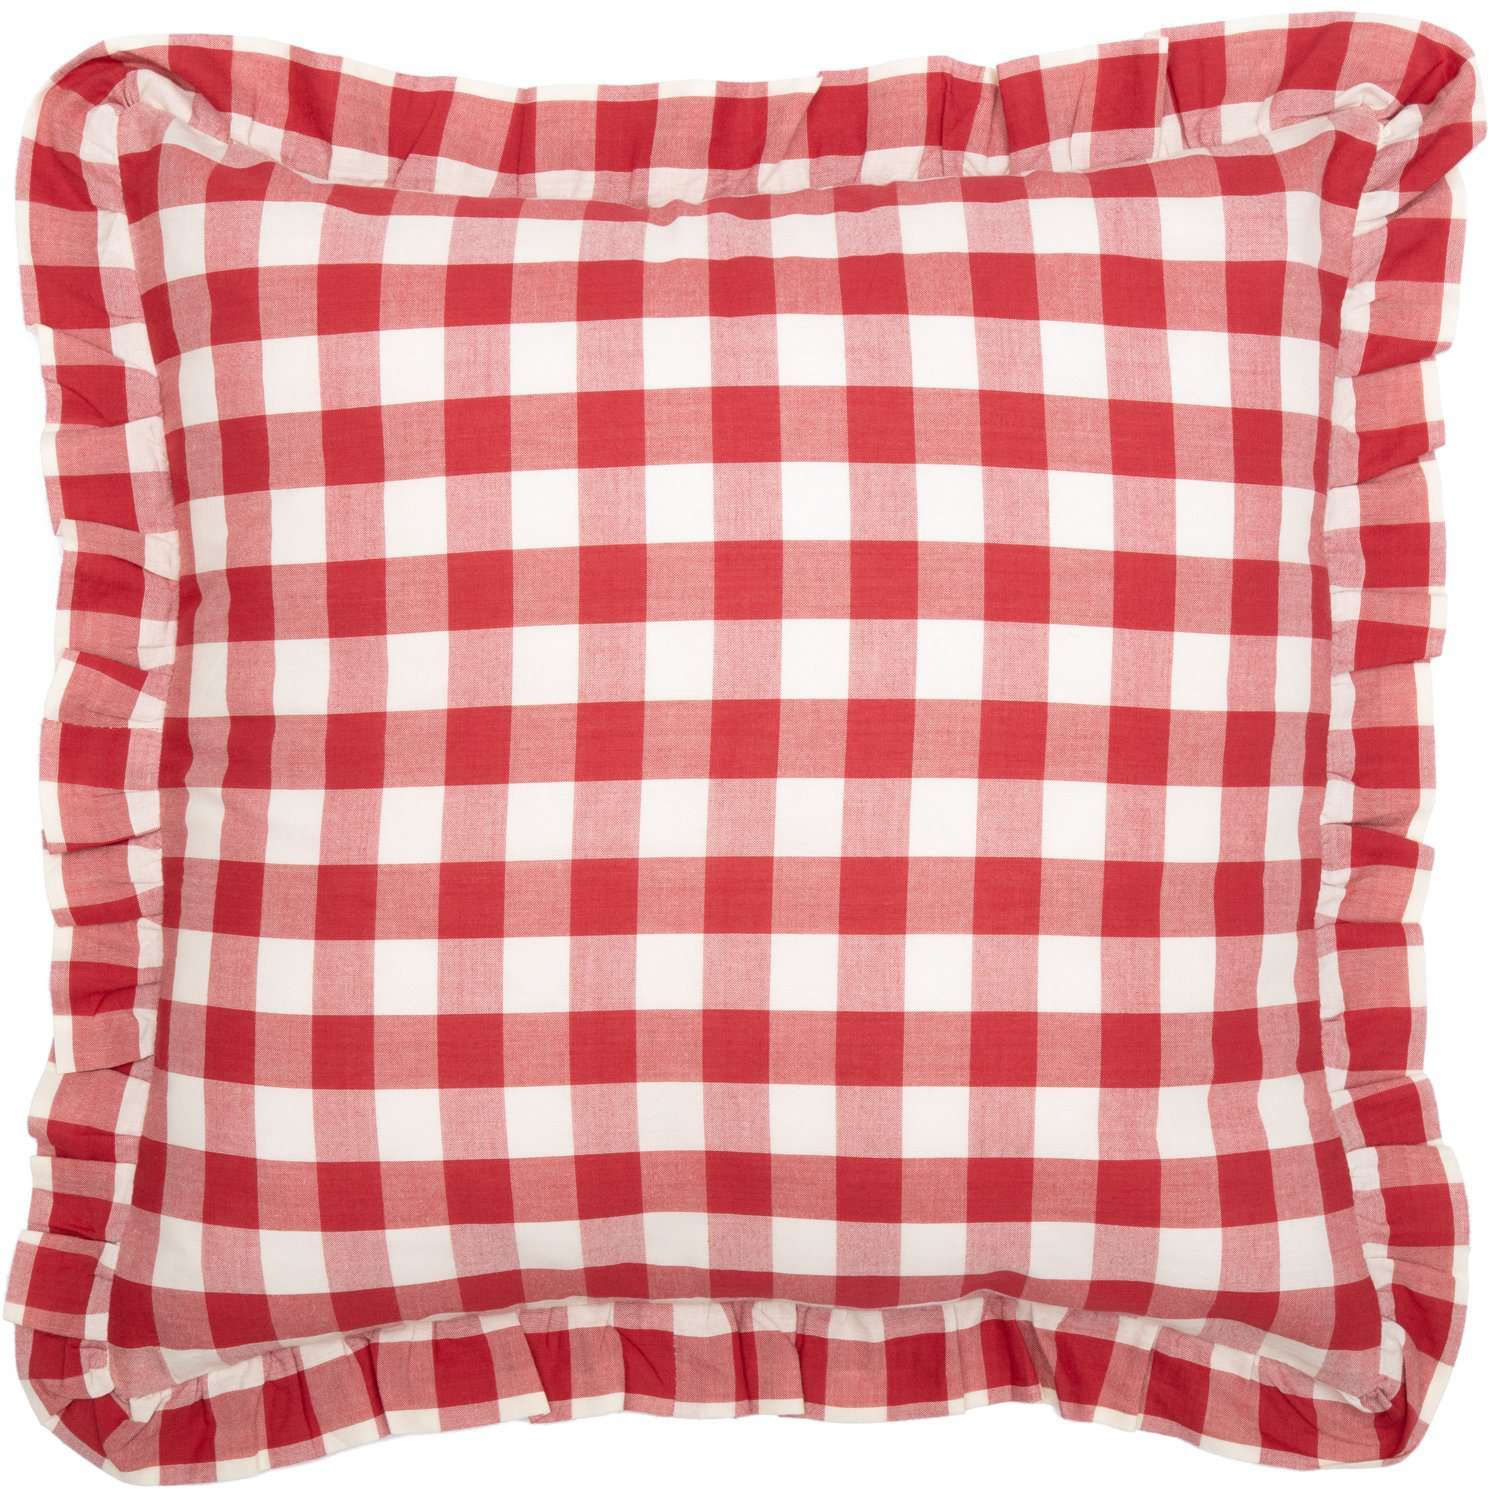 Annie Buffalo Check Ruffled Fabric Pillow Black, Grey, Red Pillows VHC Brands Red 